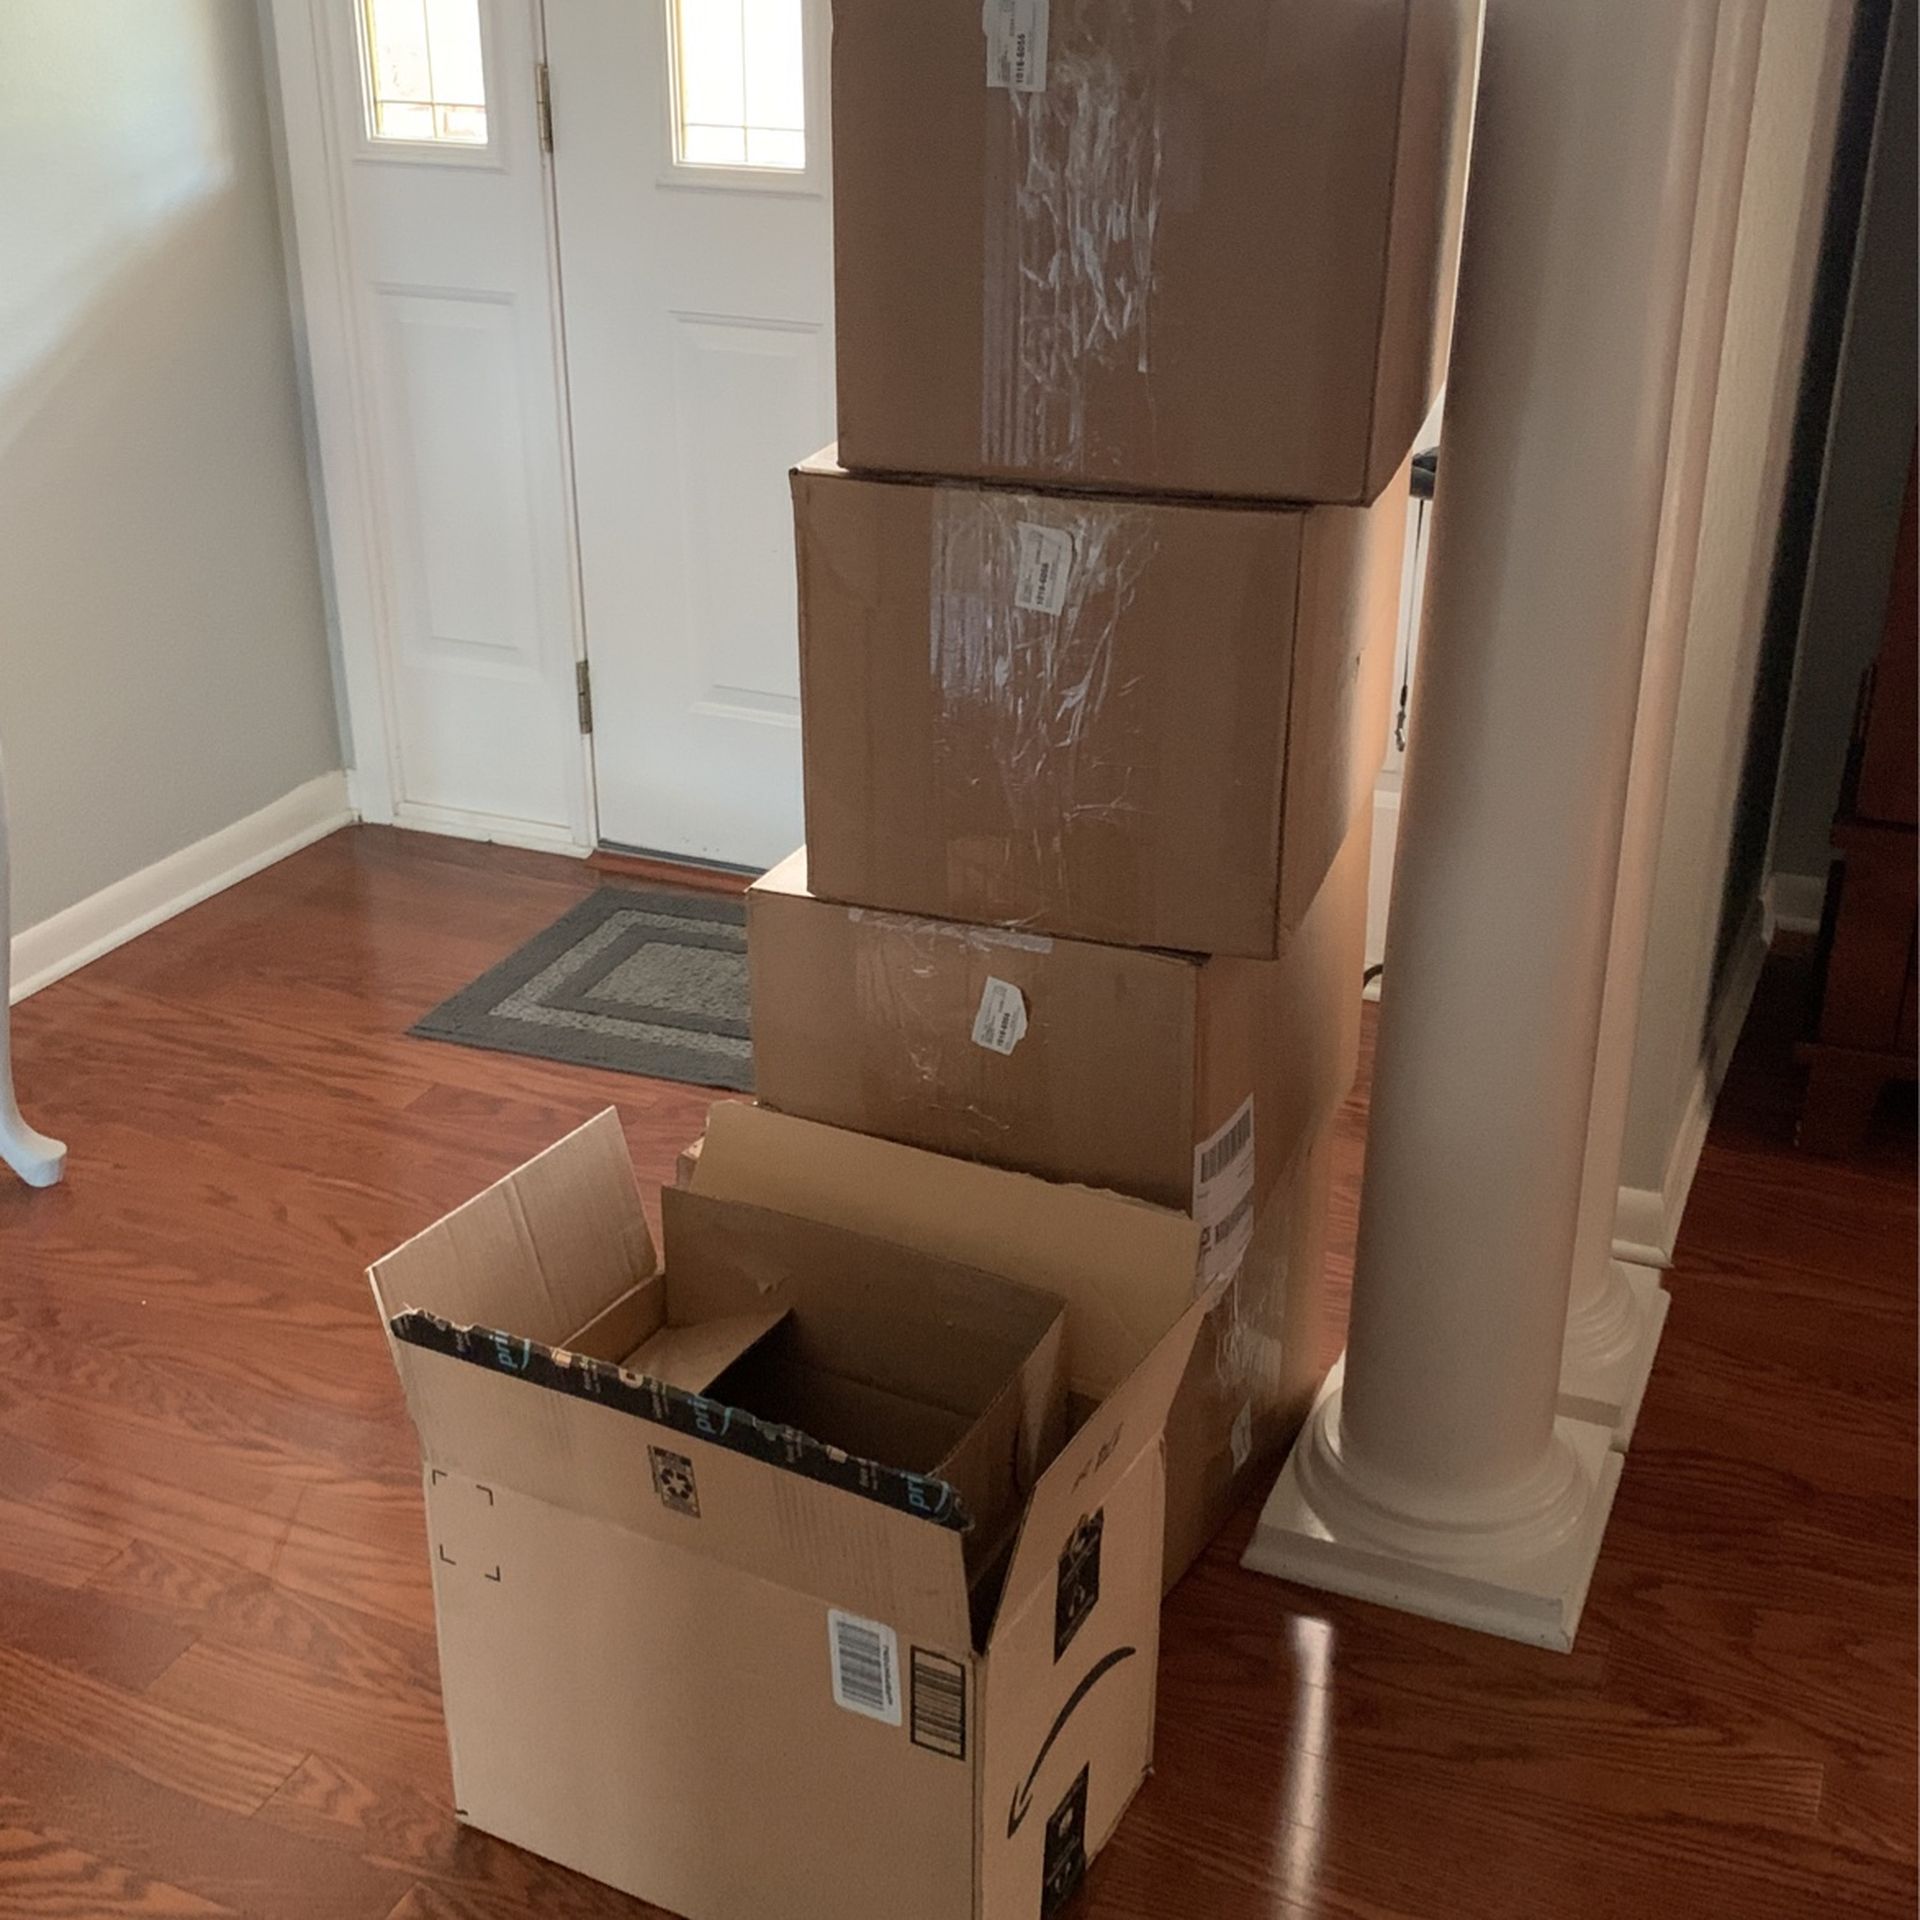 Free Small Moving Or Packing Boxes